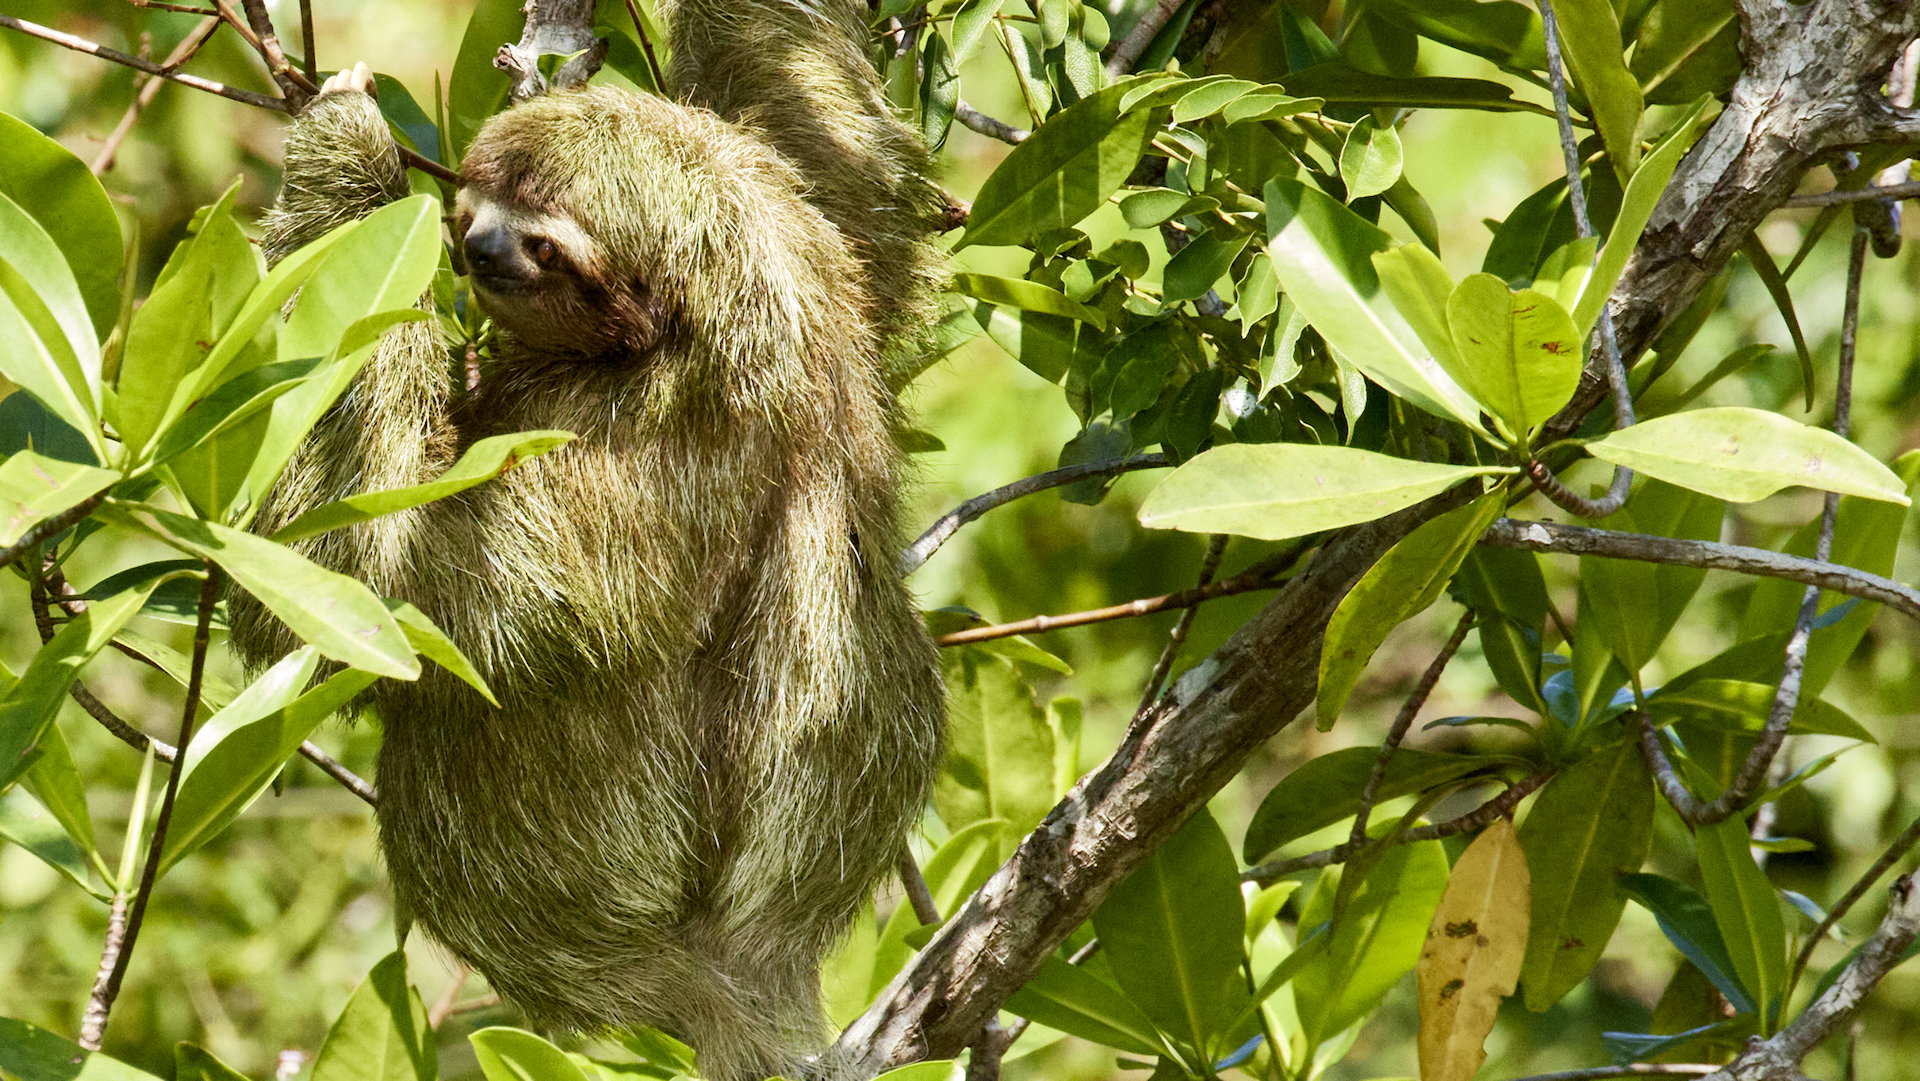 Three toed sloth, unusually, slowly moving during the day - image 16